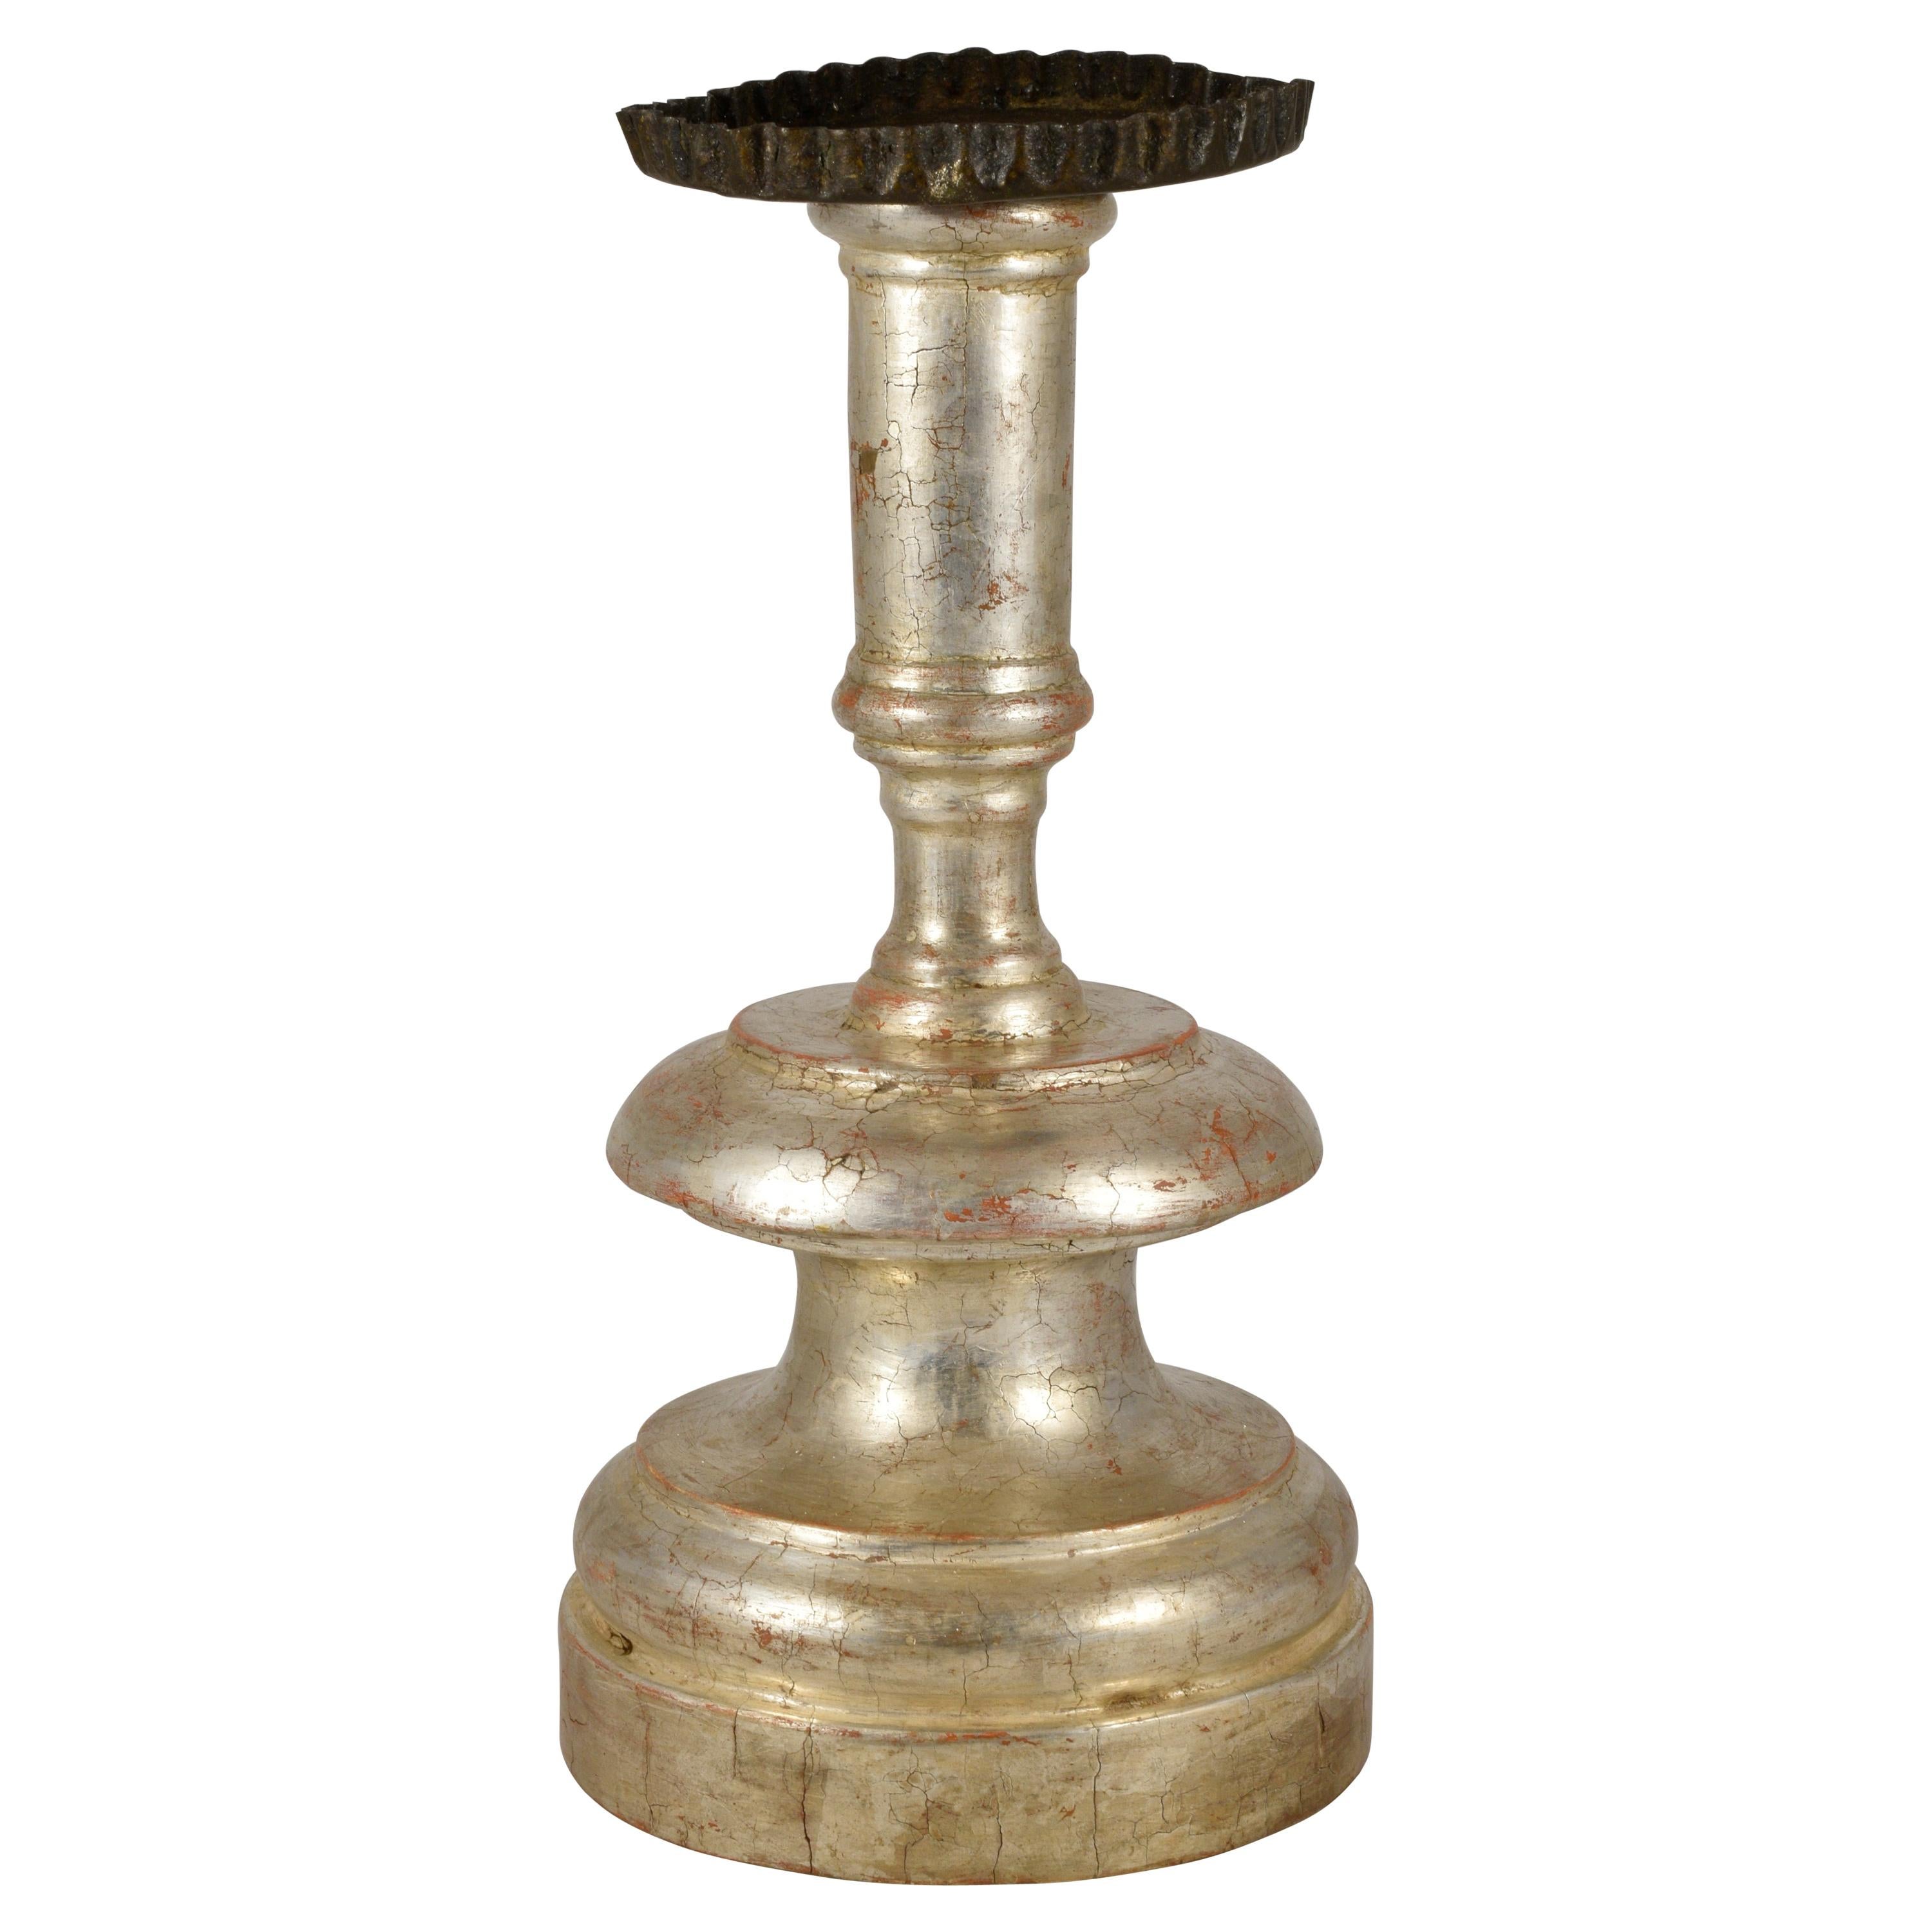 Florentine Candlestick in Lathed and Silvered Wood, Late 17th Century